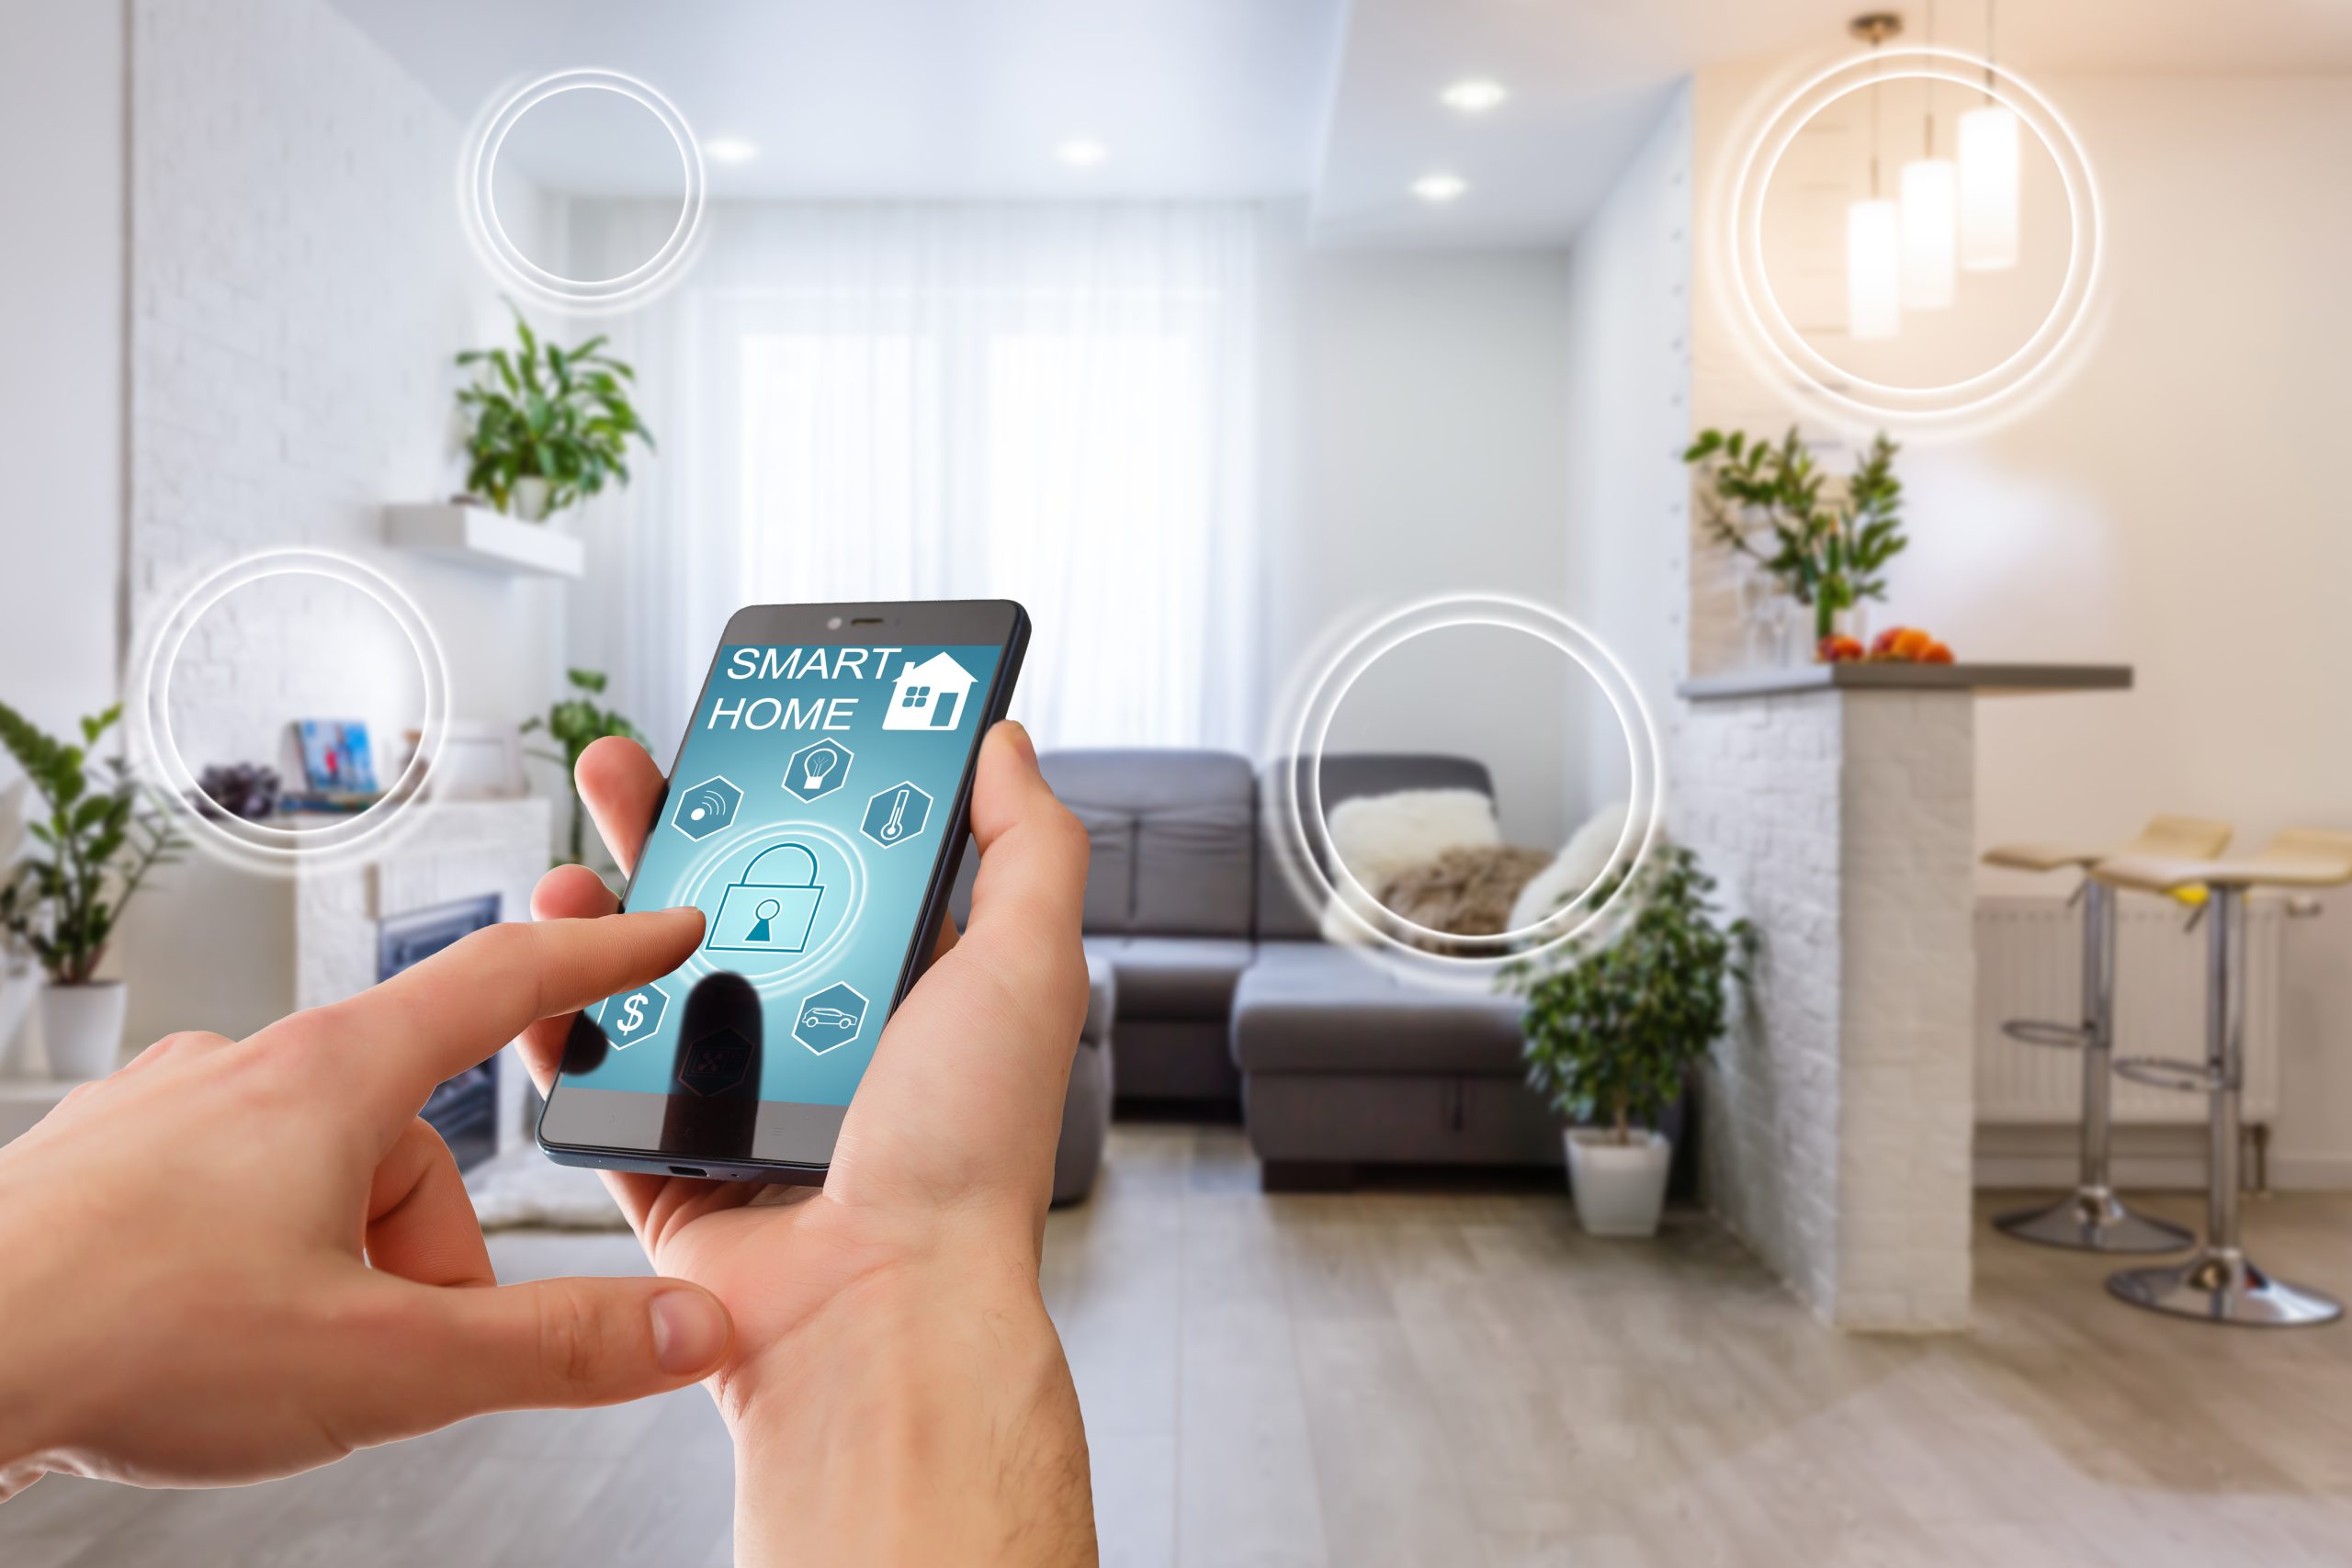 image of a person using an app to control smart home features